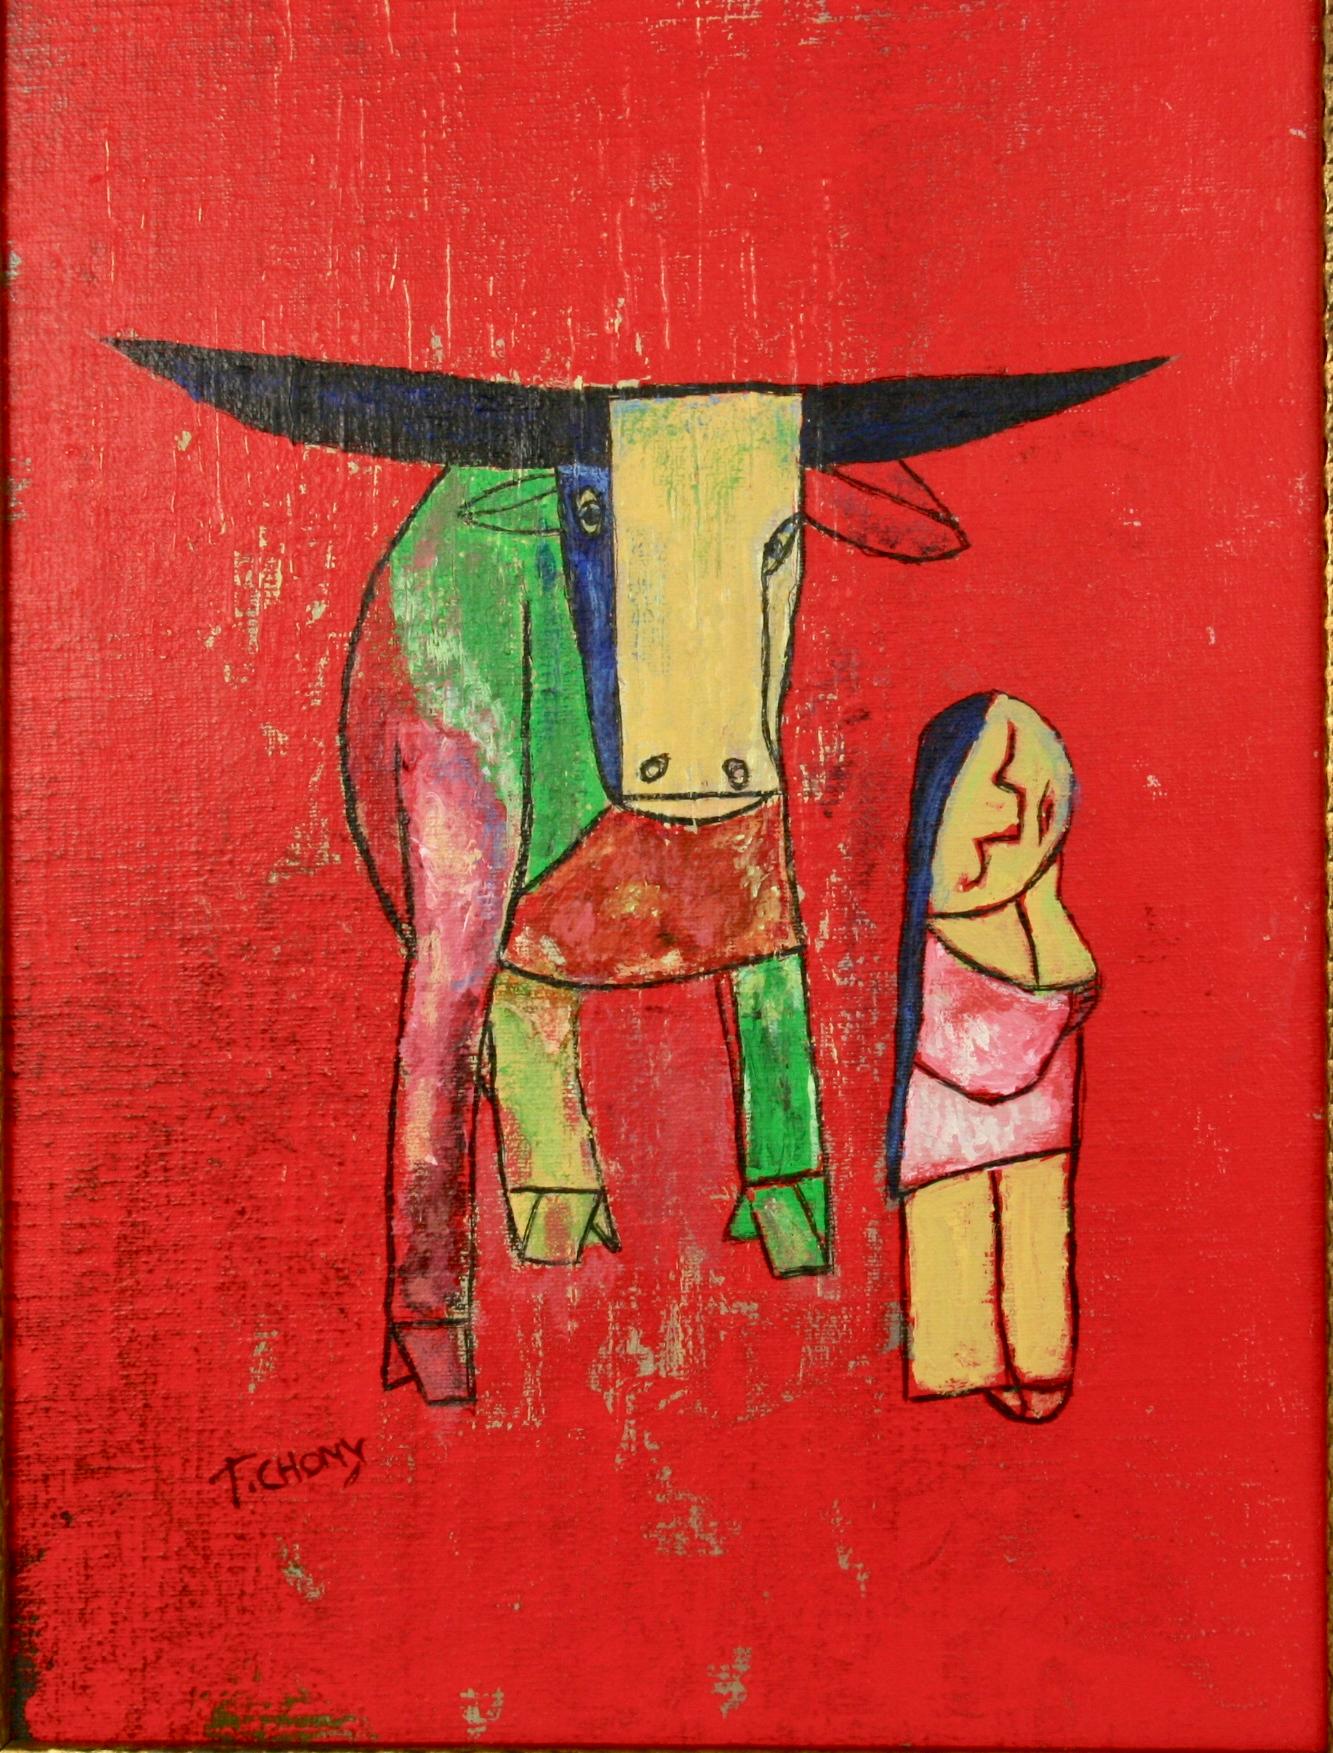 Surreal Child With Buffalo - Painting by T.Chony